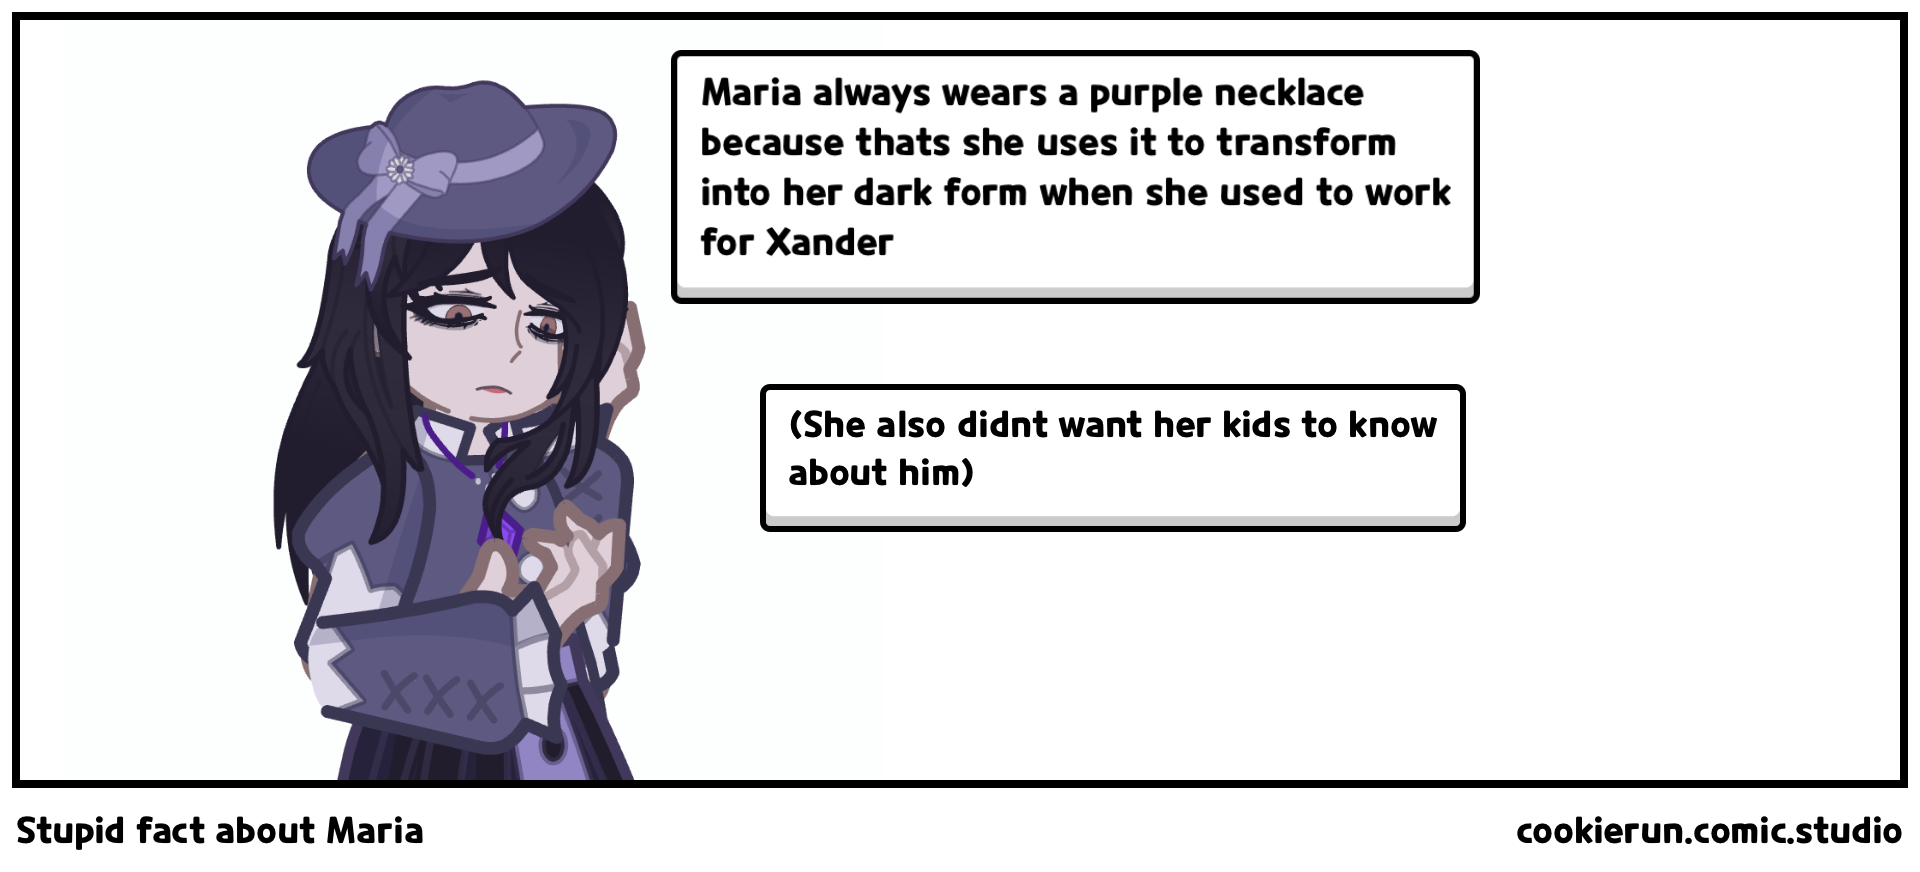 Stupid fact about Maria